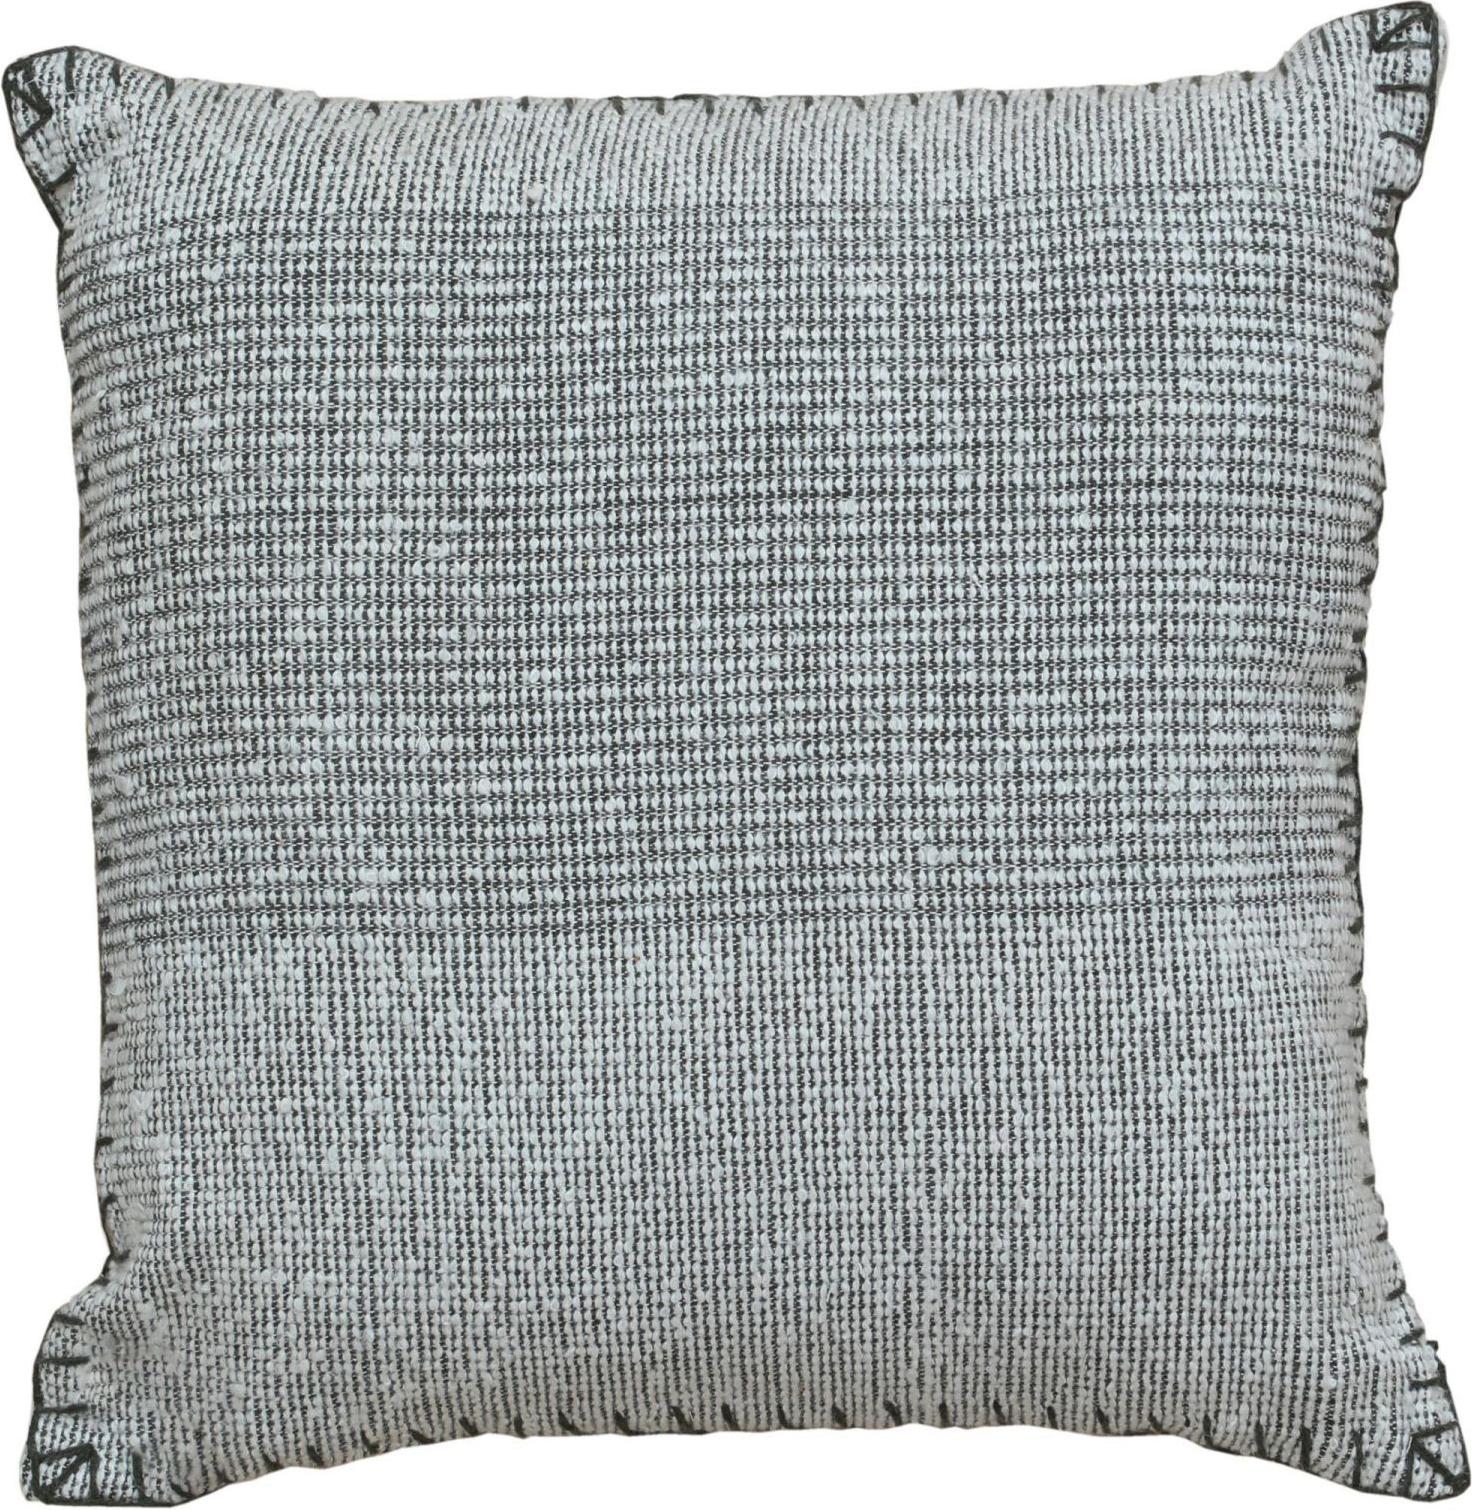 Modern Contemporary Boho Chic Wool and Cotton Pillow In Gray For Sale